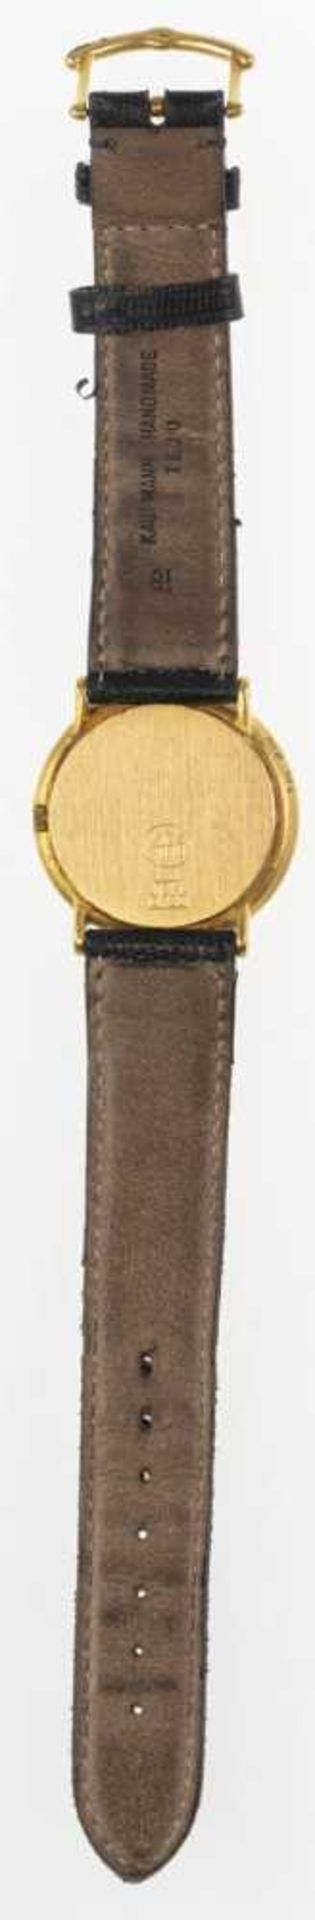 ARS designers gold watch. 750er Gold, as highlight a diamond in the mount, quartz movement, with lea - Image 2 of 3